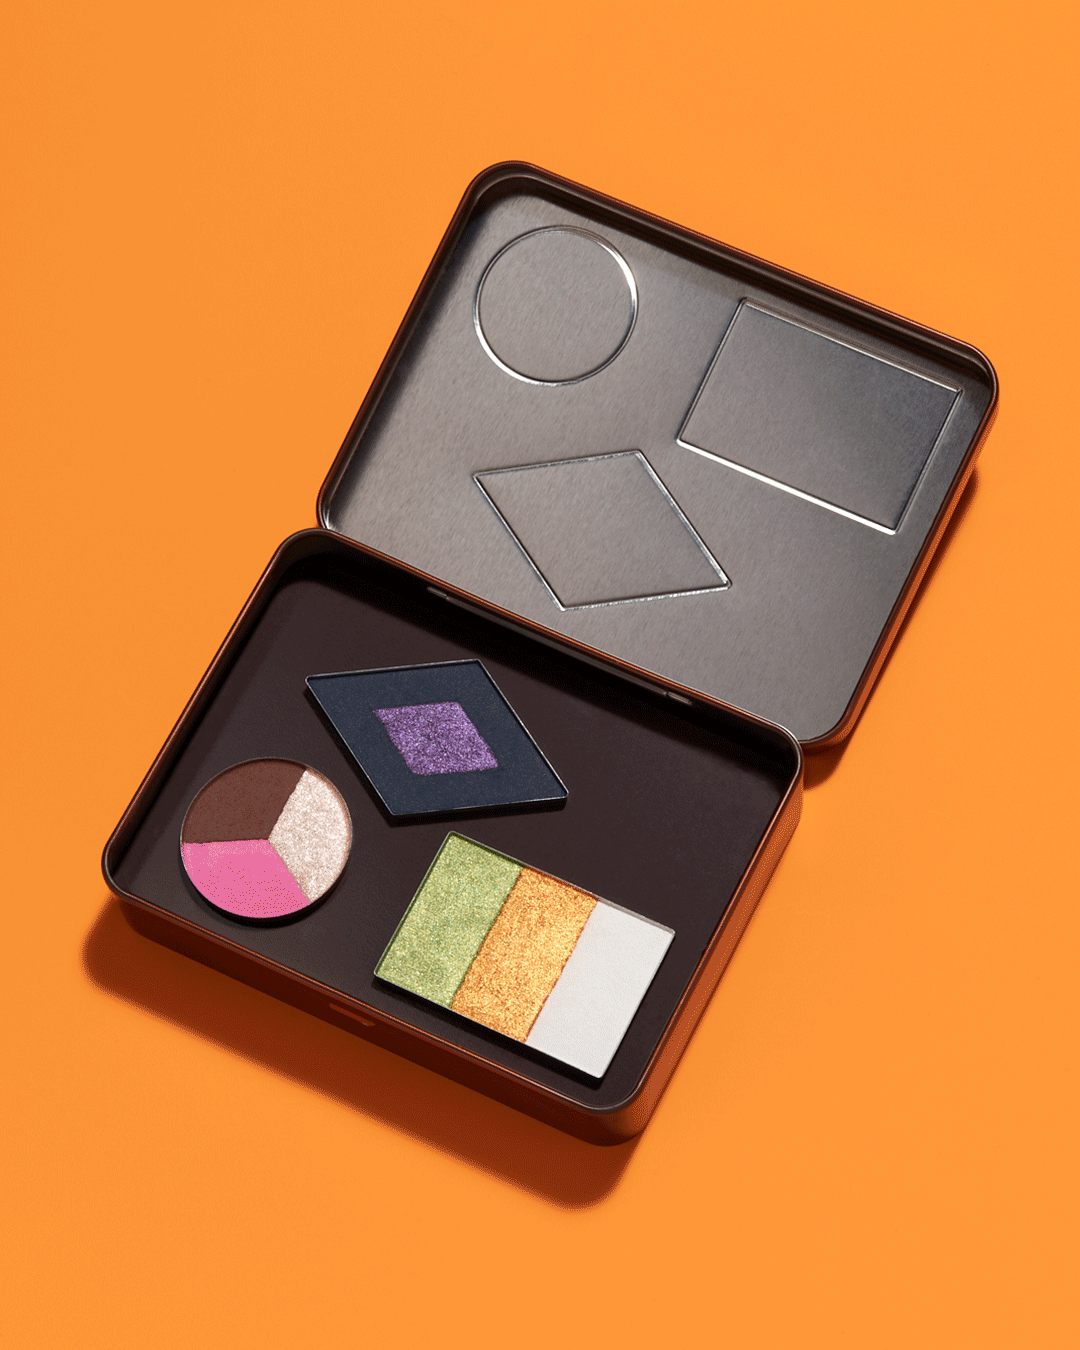 THE MAGNETIC MOVEABLE MAKEUP KIT